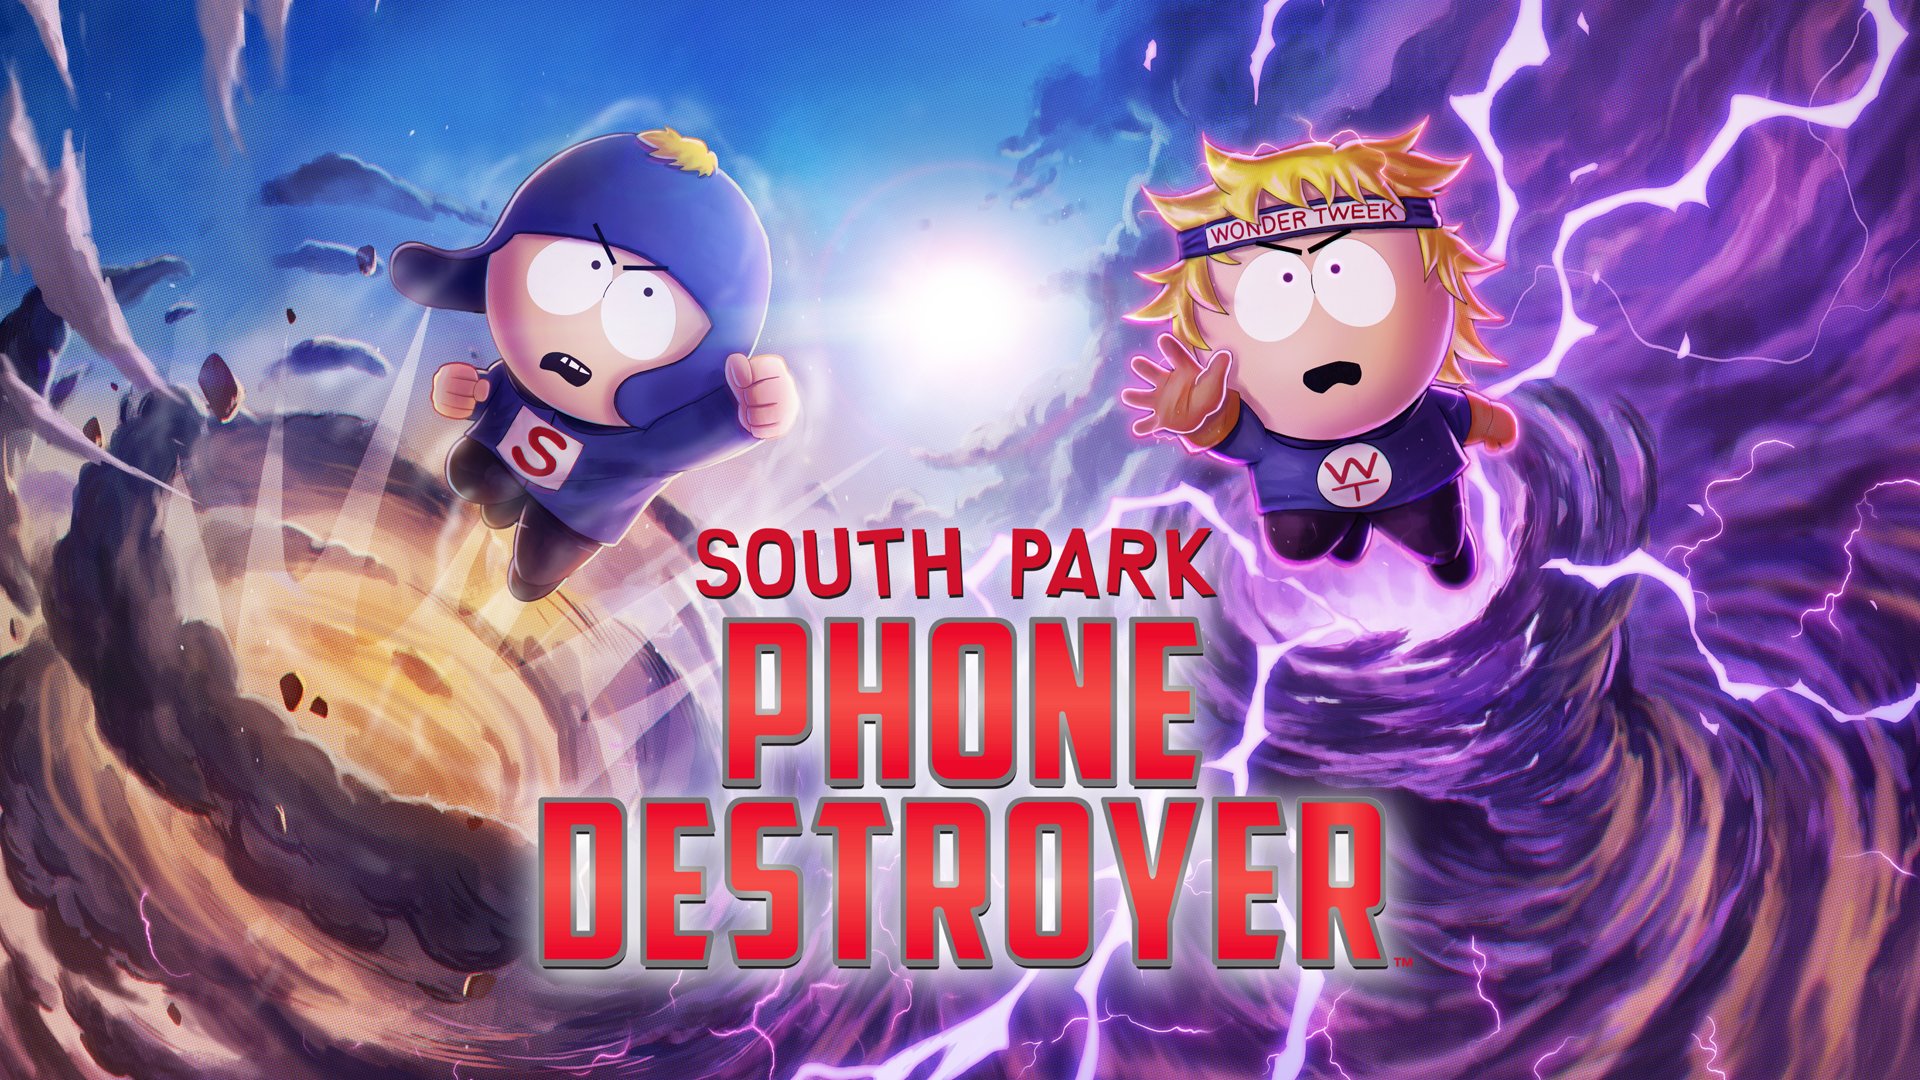 Video Game South Park: Phone Destroyer HD Wallpaper | Background Image